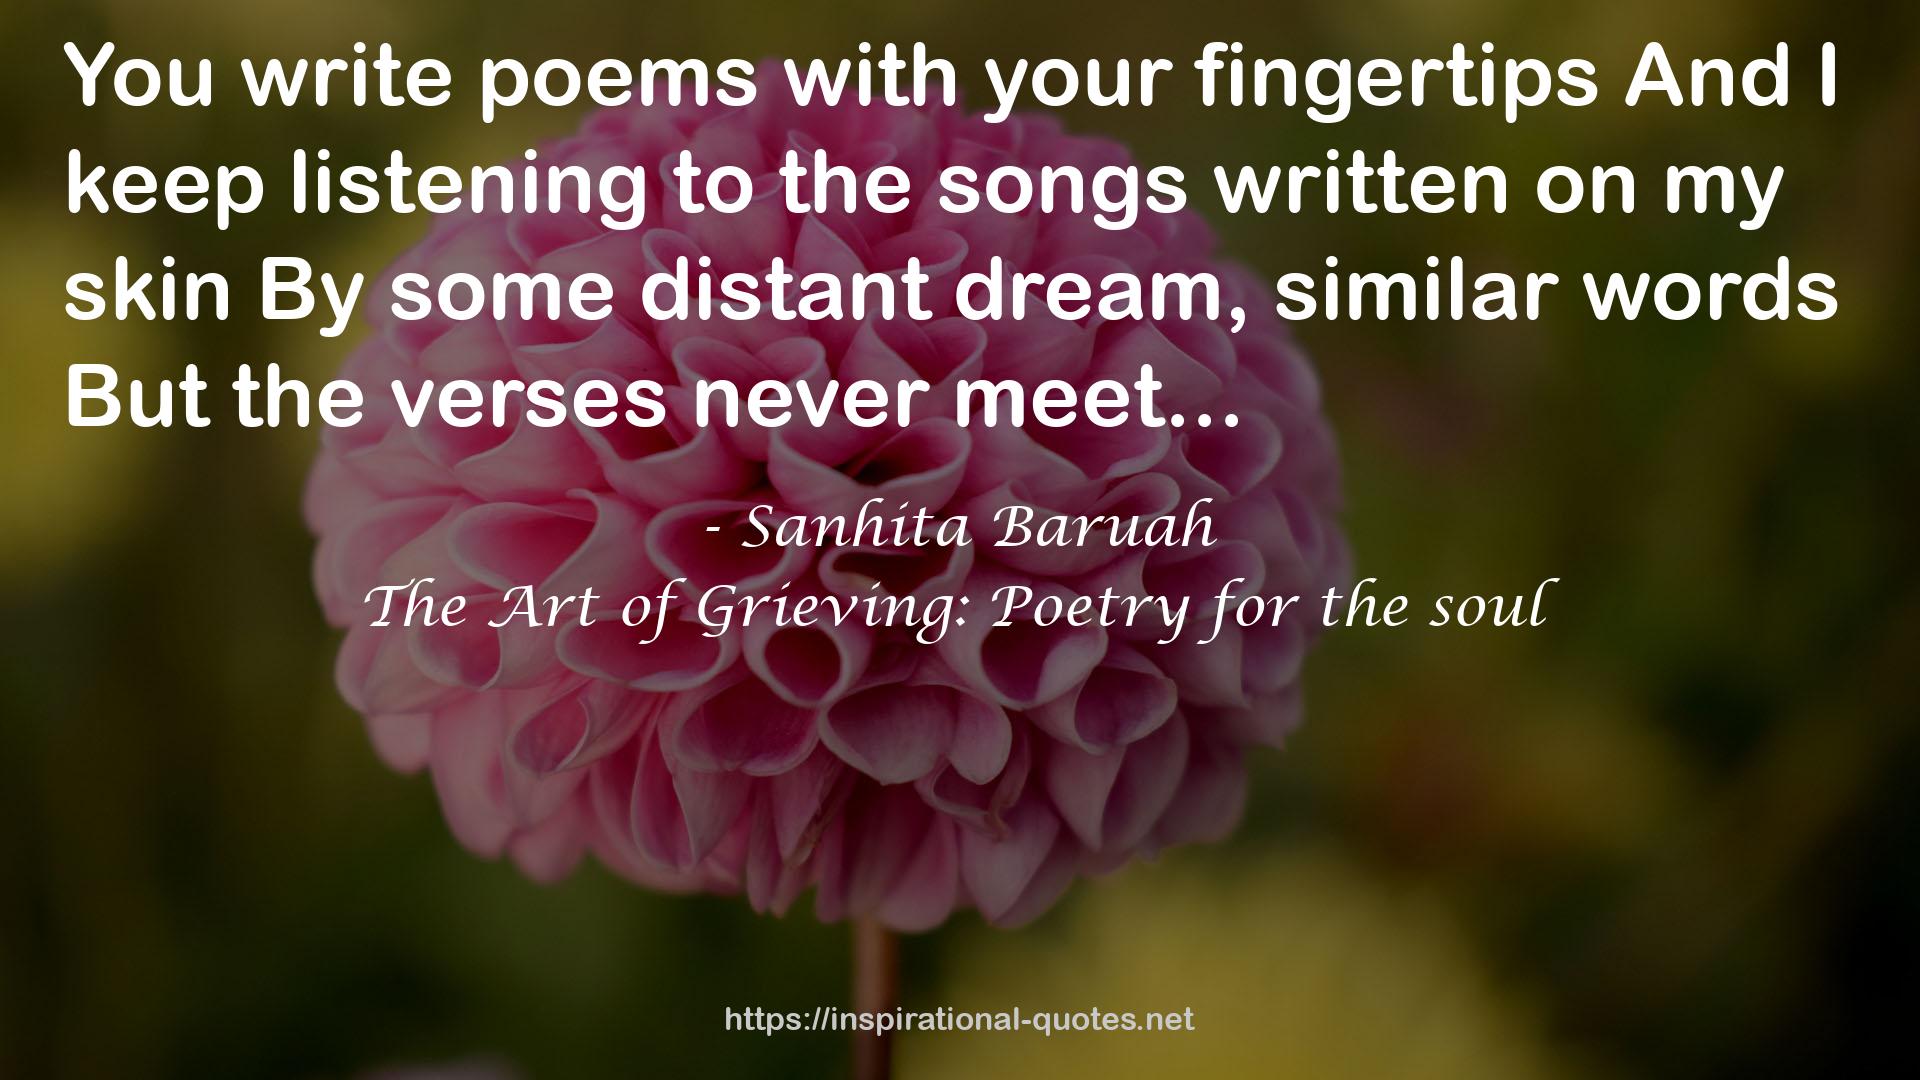 The Art of Grieving: Poetry for the soul QUOTES